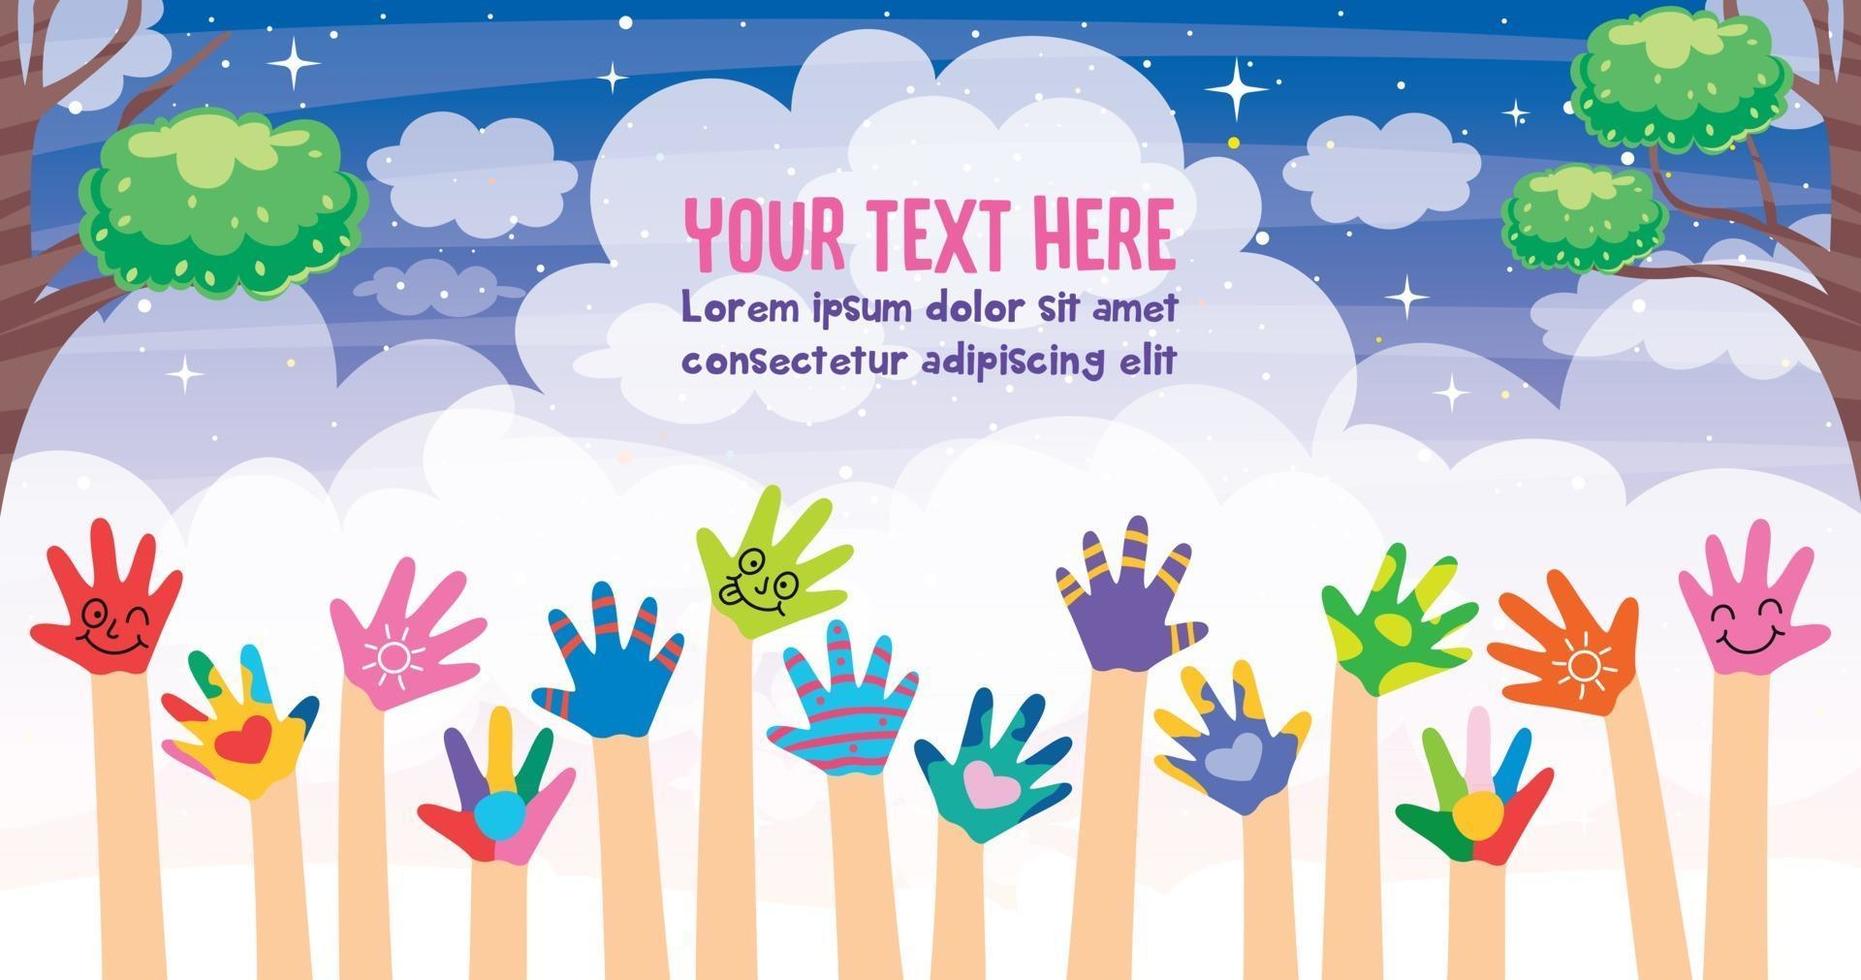 Concept Design With Painted Hands Of Little Children vector